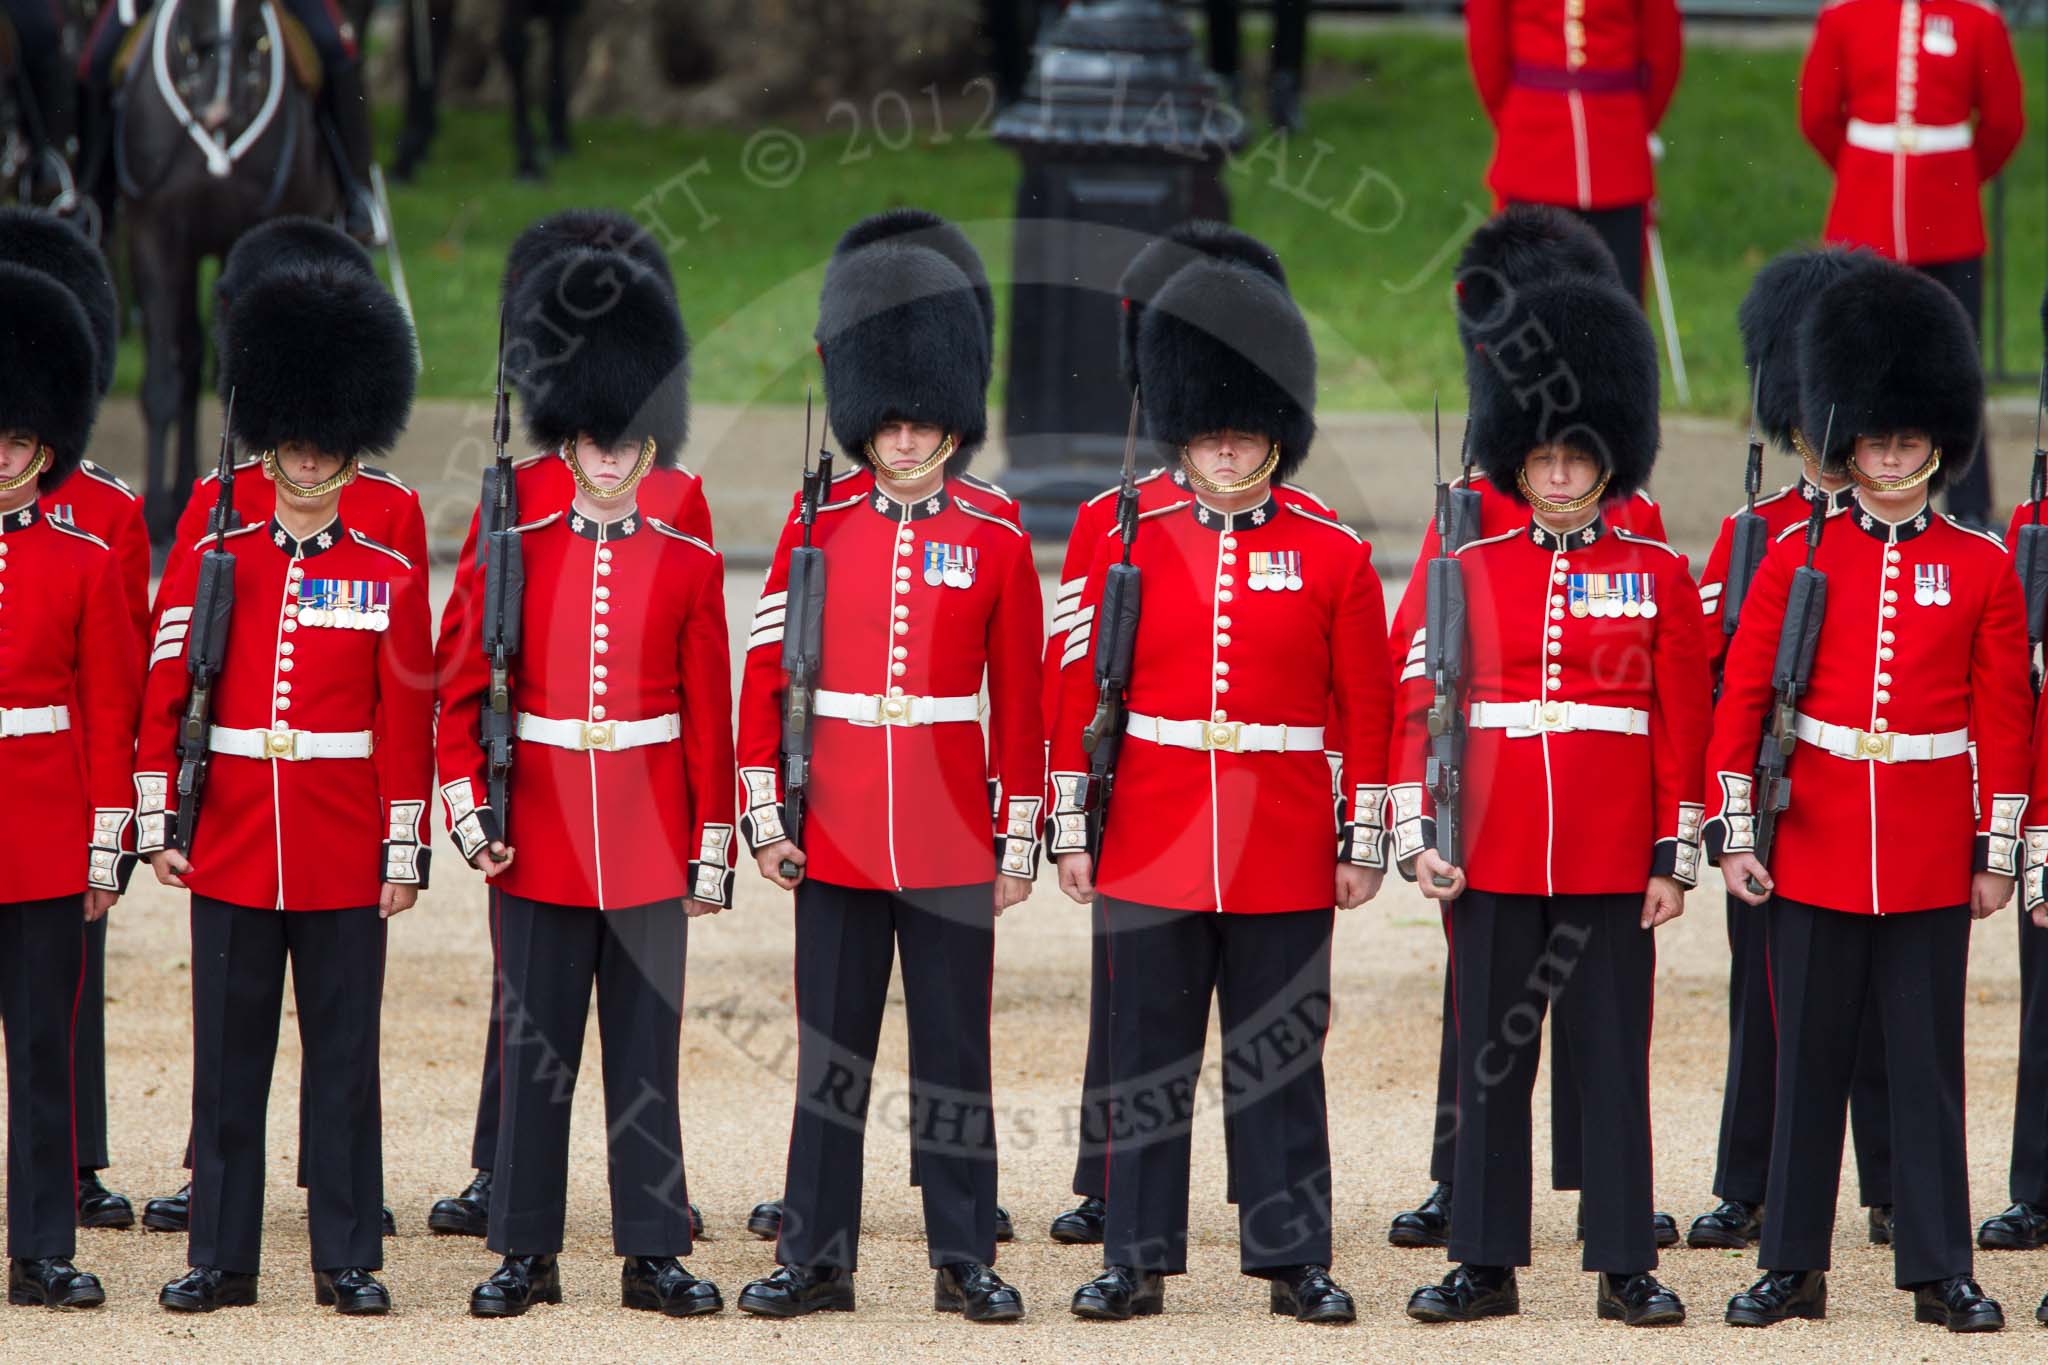 The Colonel's Review 2012: No. 2 Guard, 1st Battalion Coldstream Guards..
Horse Guards Parade, Westminster,
London SW1,

United Kingdom,
on 09 June 2012 at 10:41, image #107